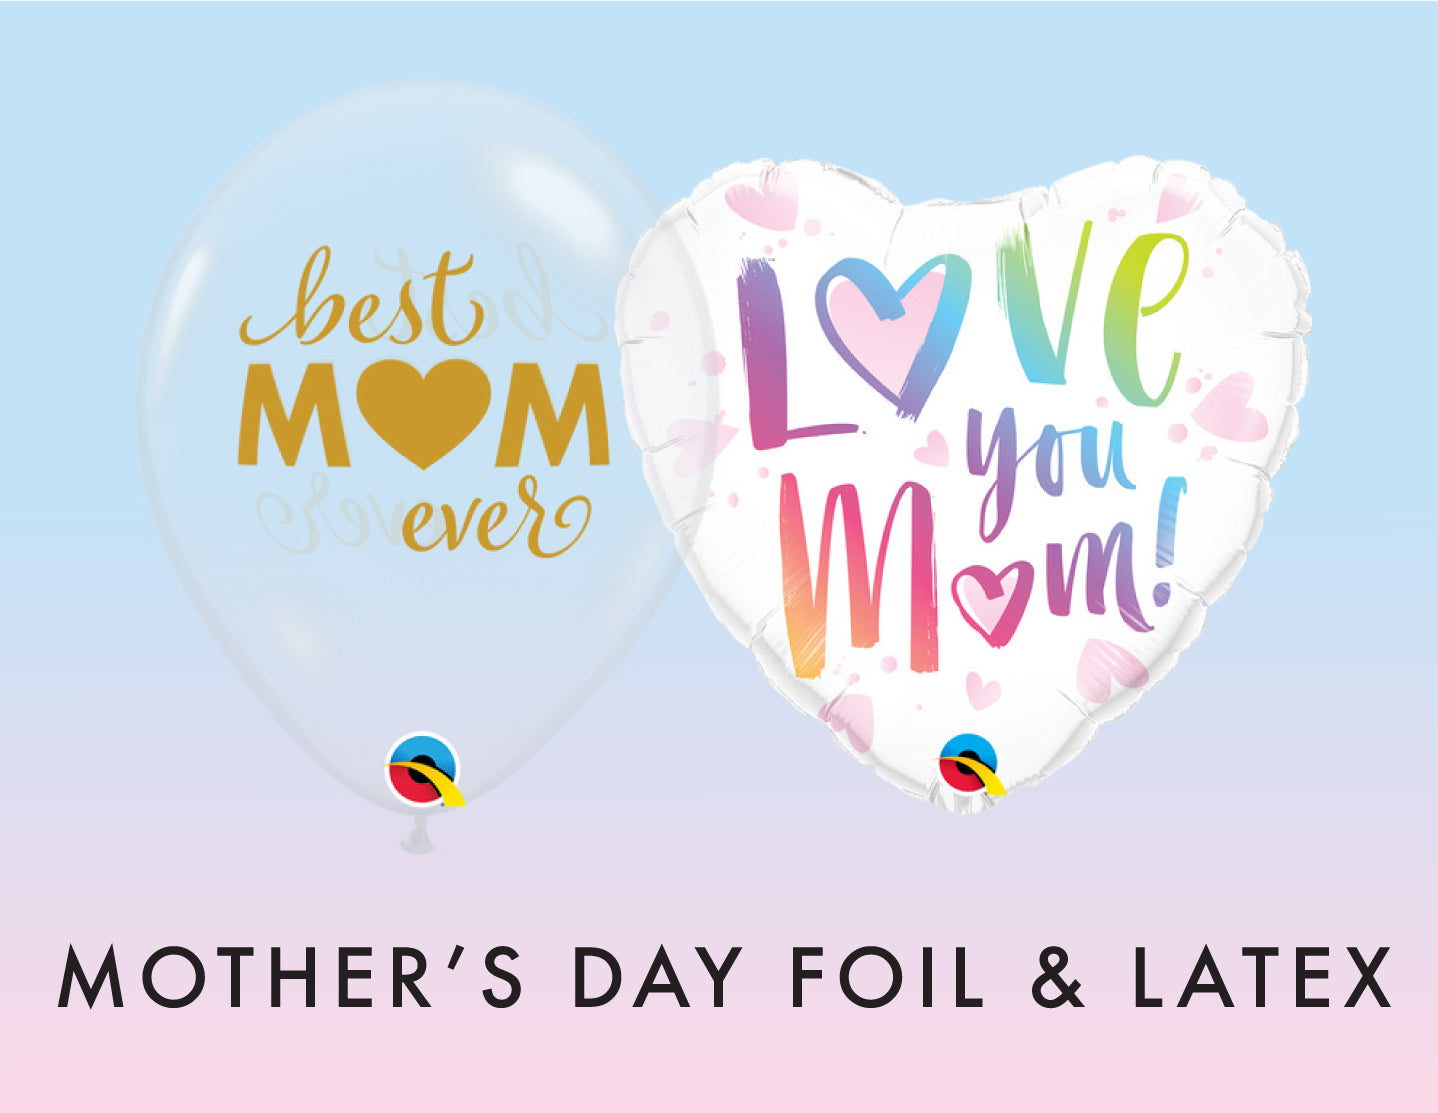 Mother's Day Foil & Latex